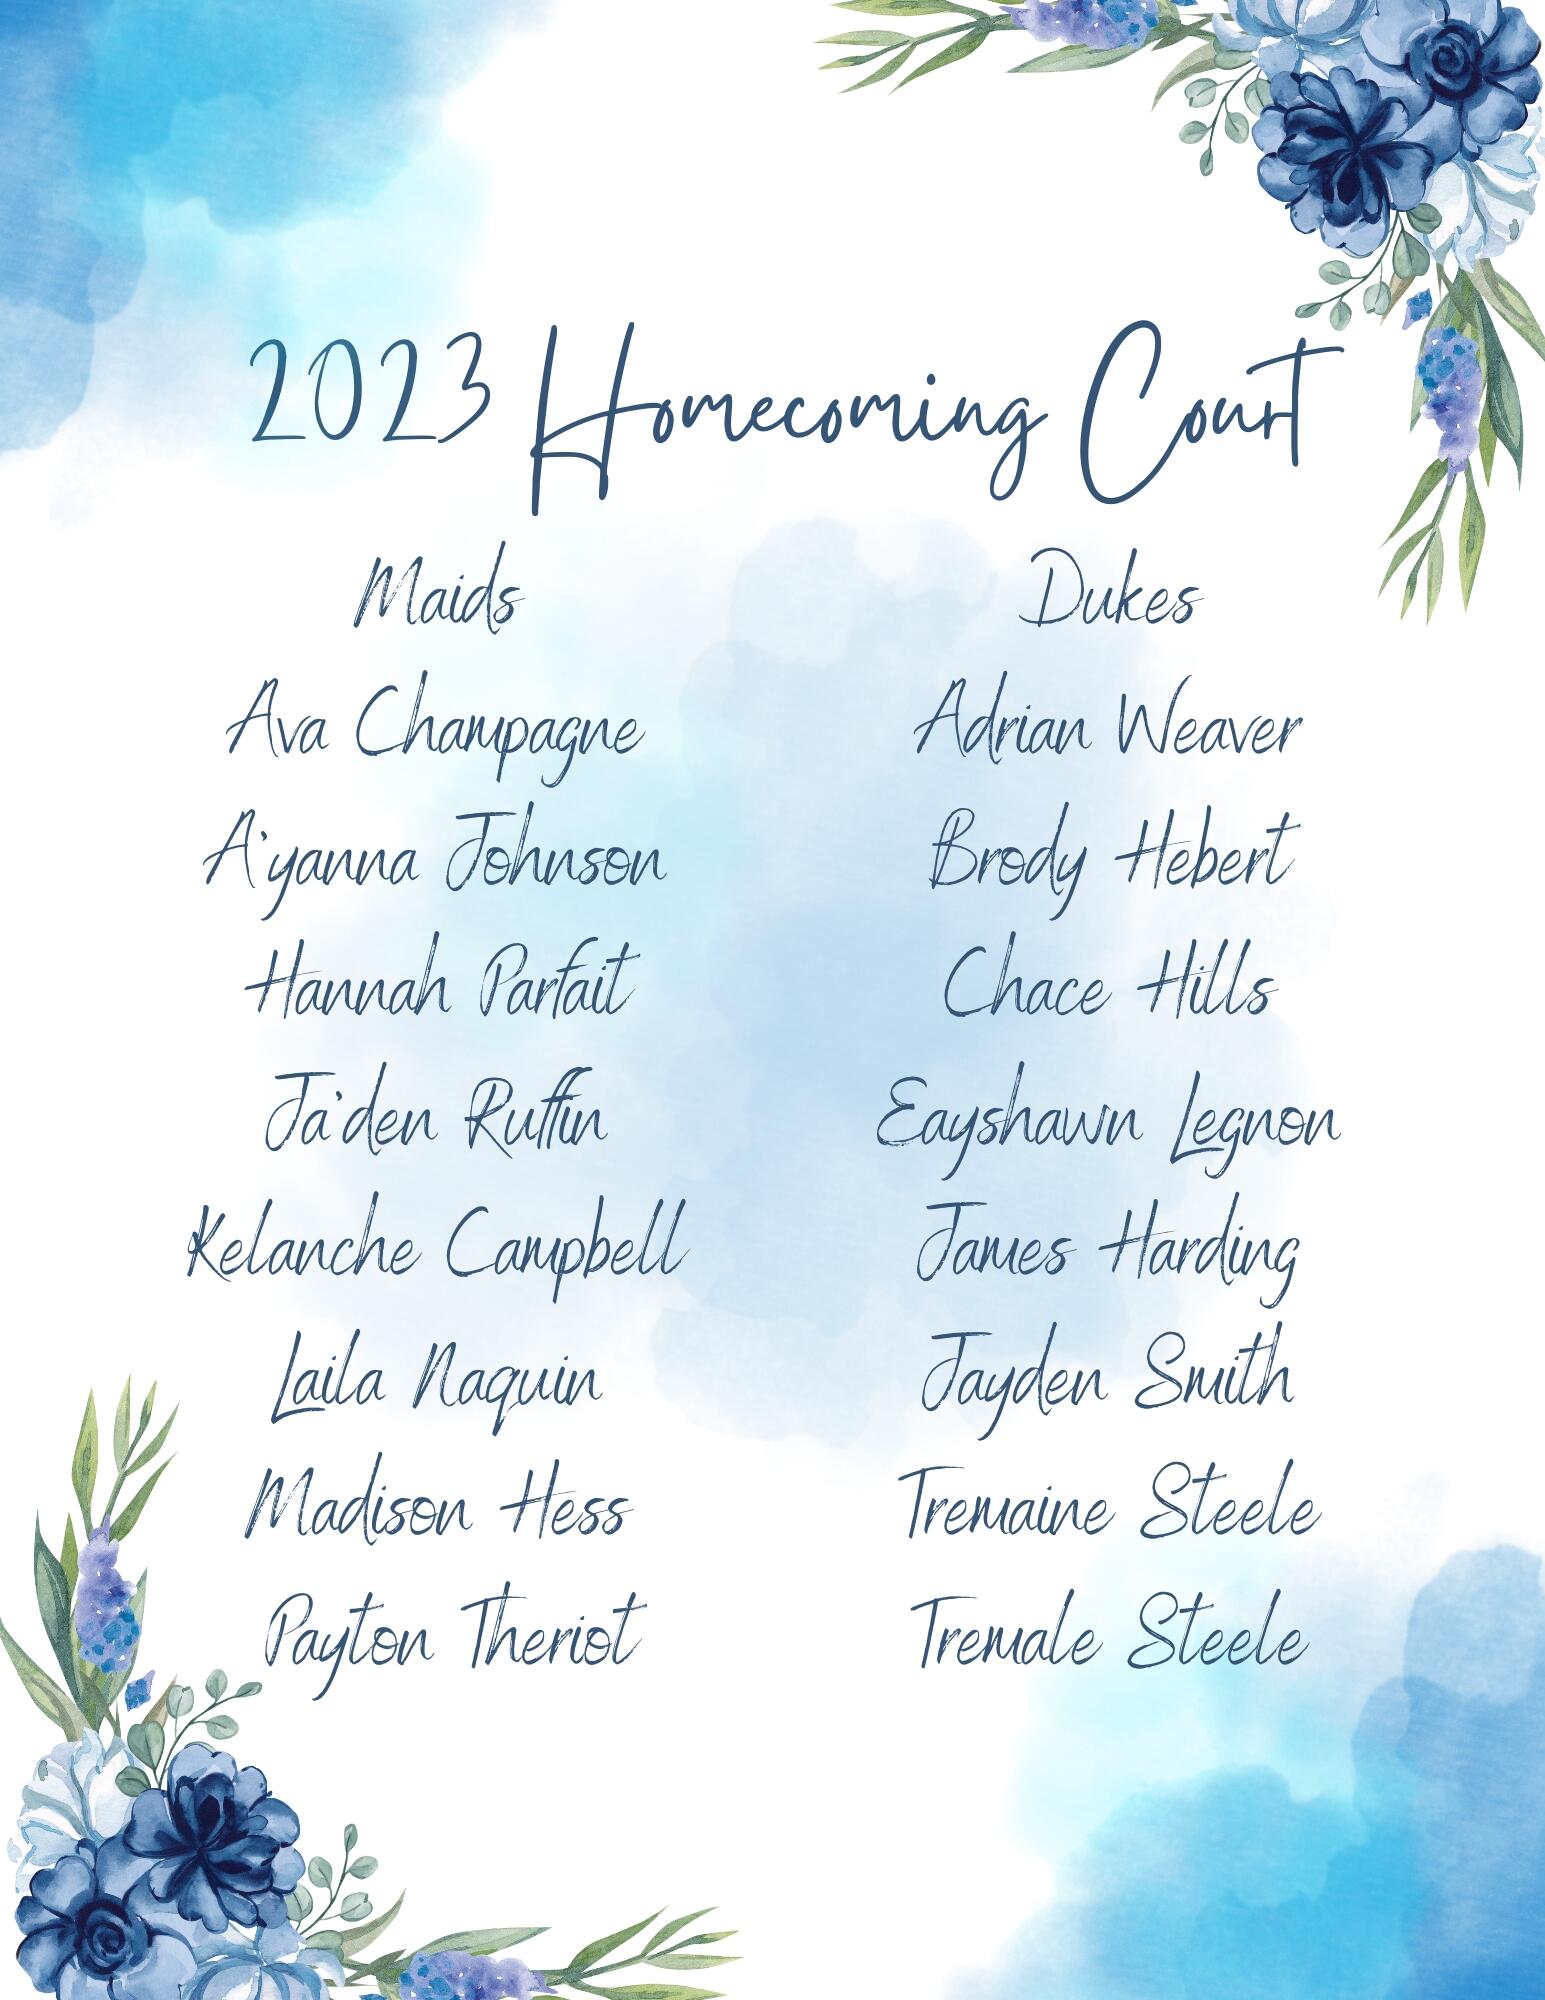 List of Homecoming Court members 